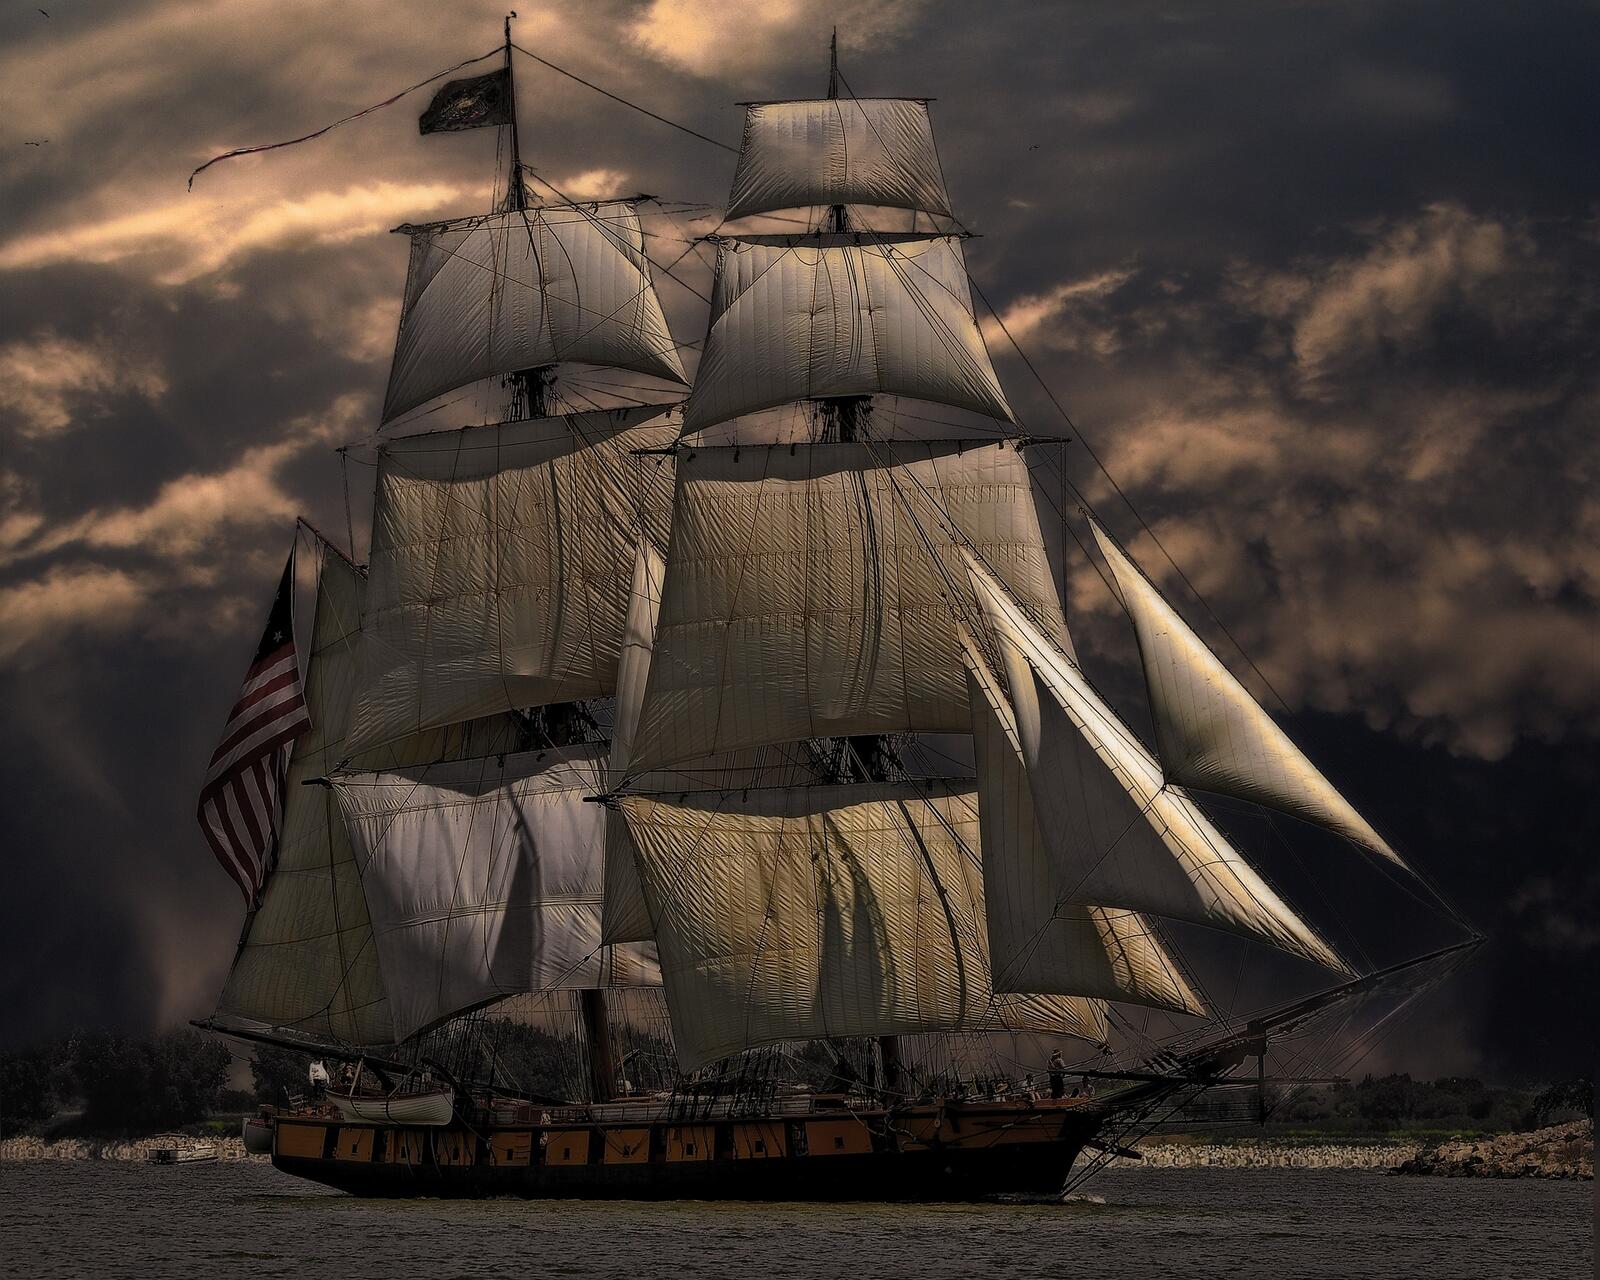 Free photo A large sailing ship against an overcast sky